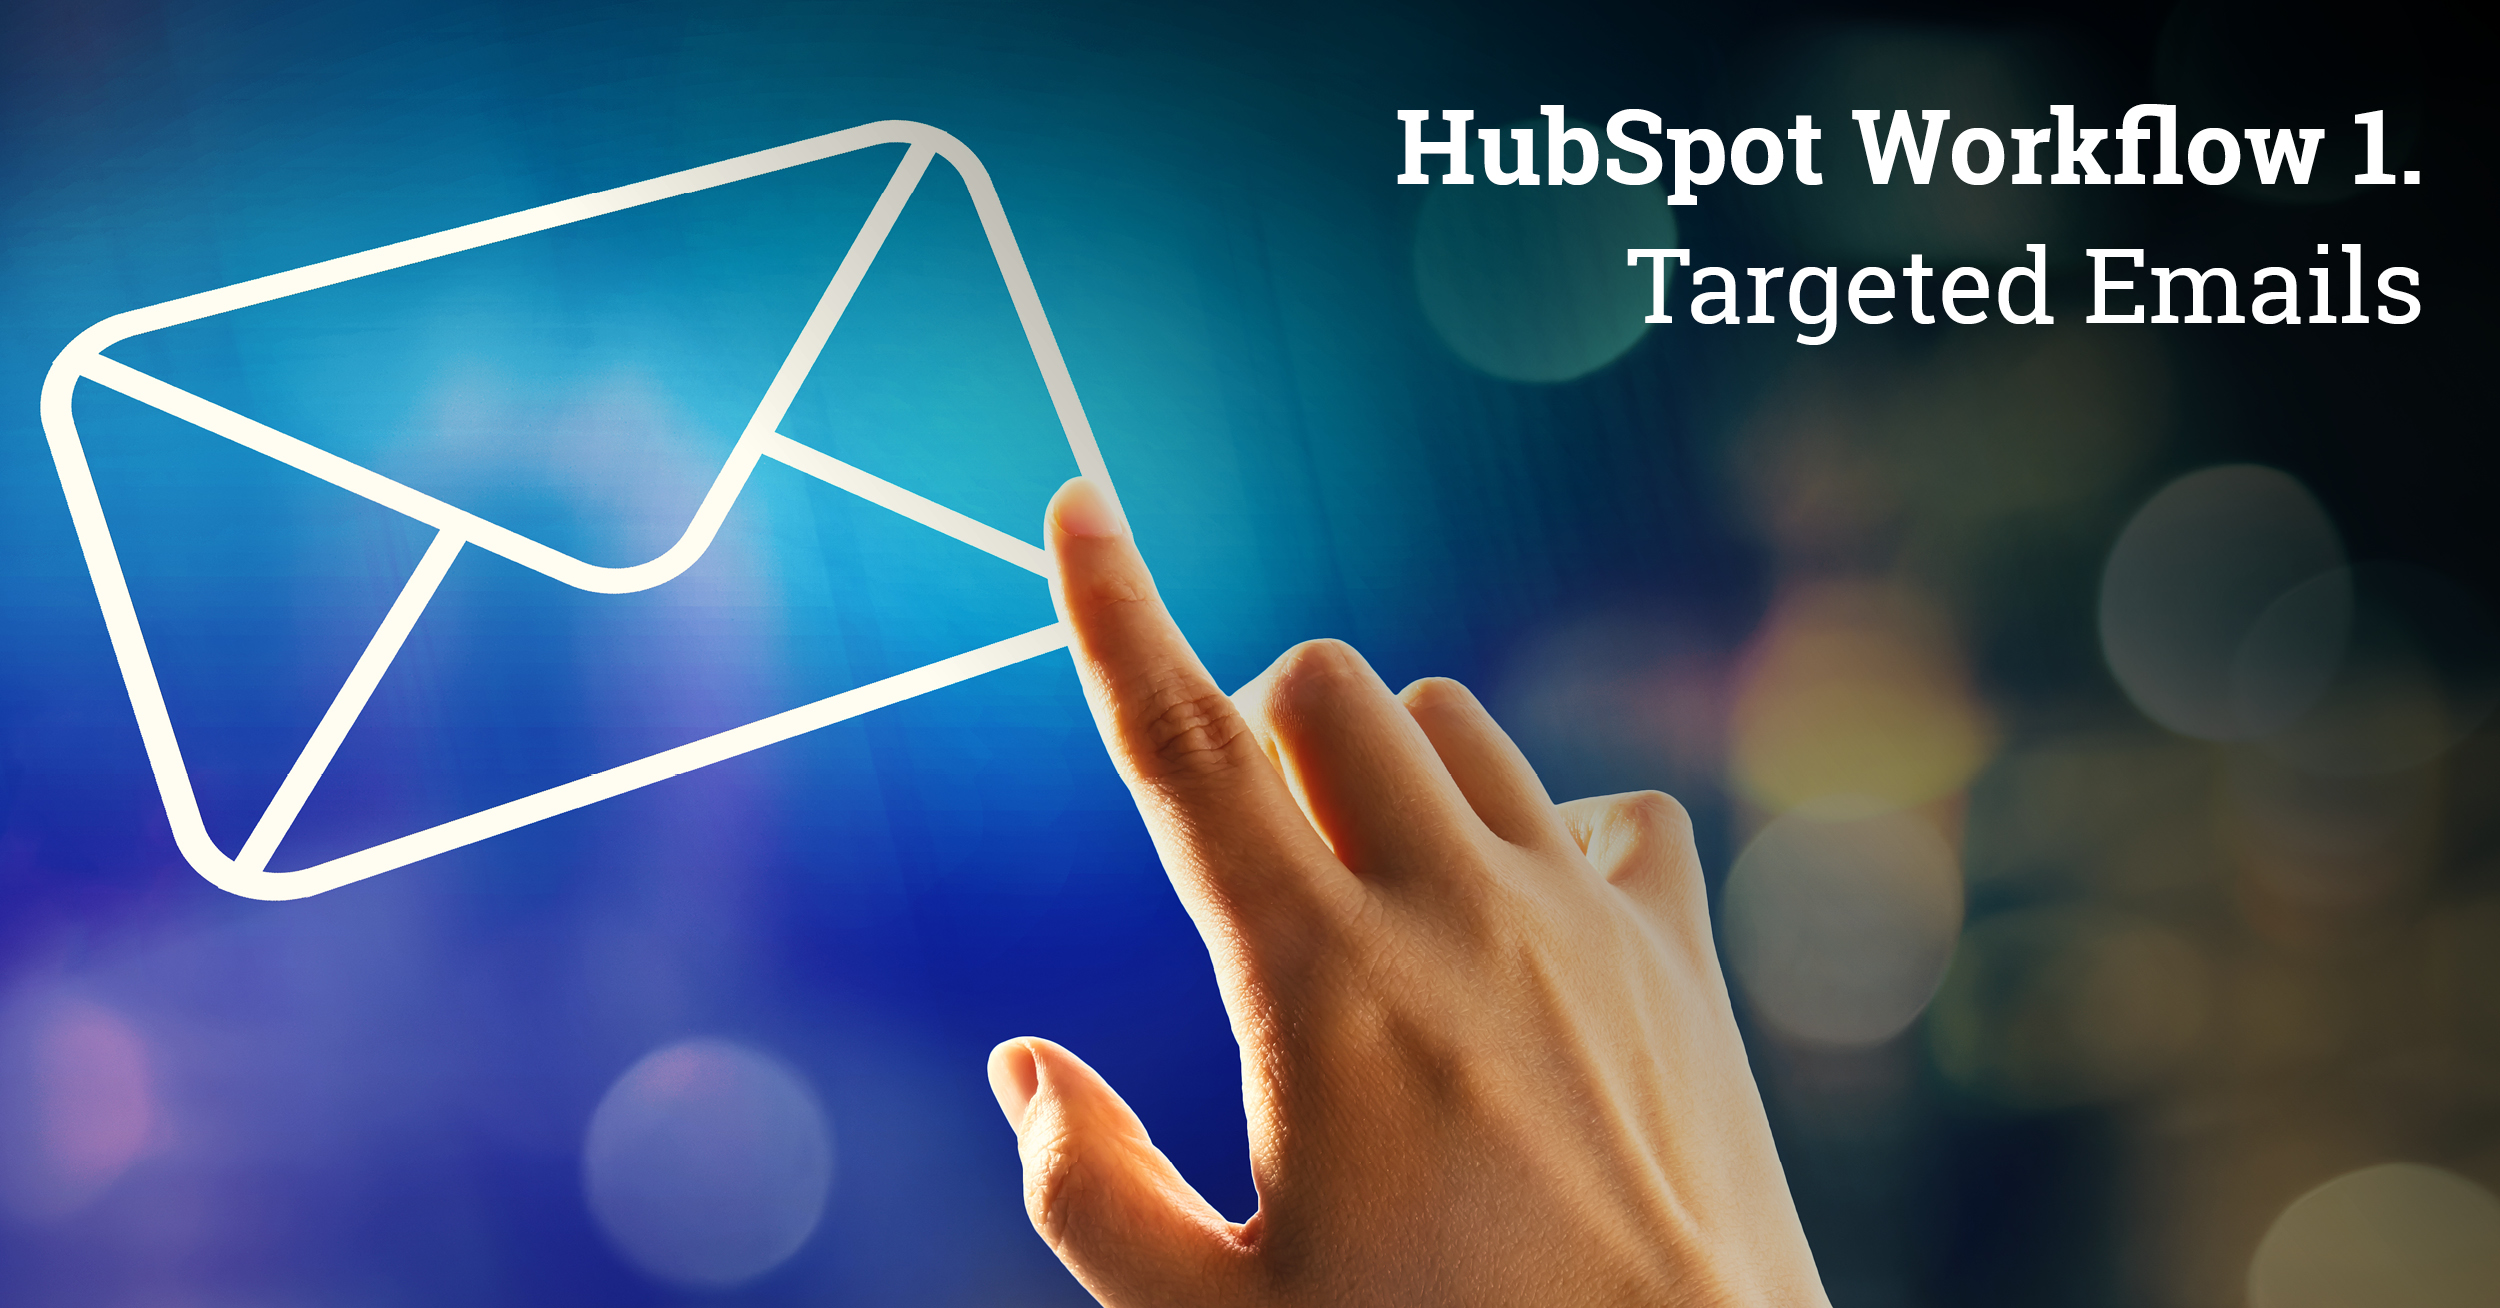 HubSpot Workflow 1: Targeted Emails